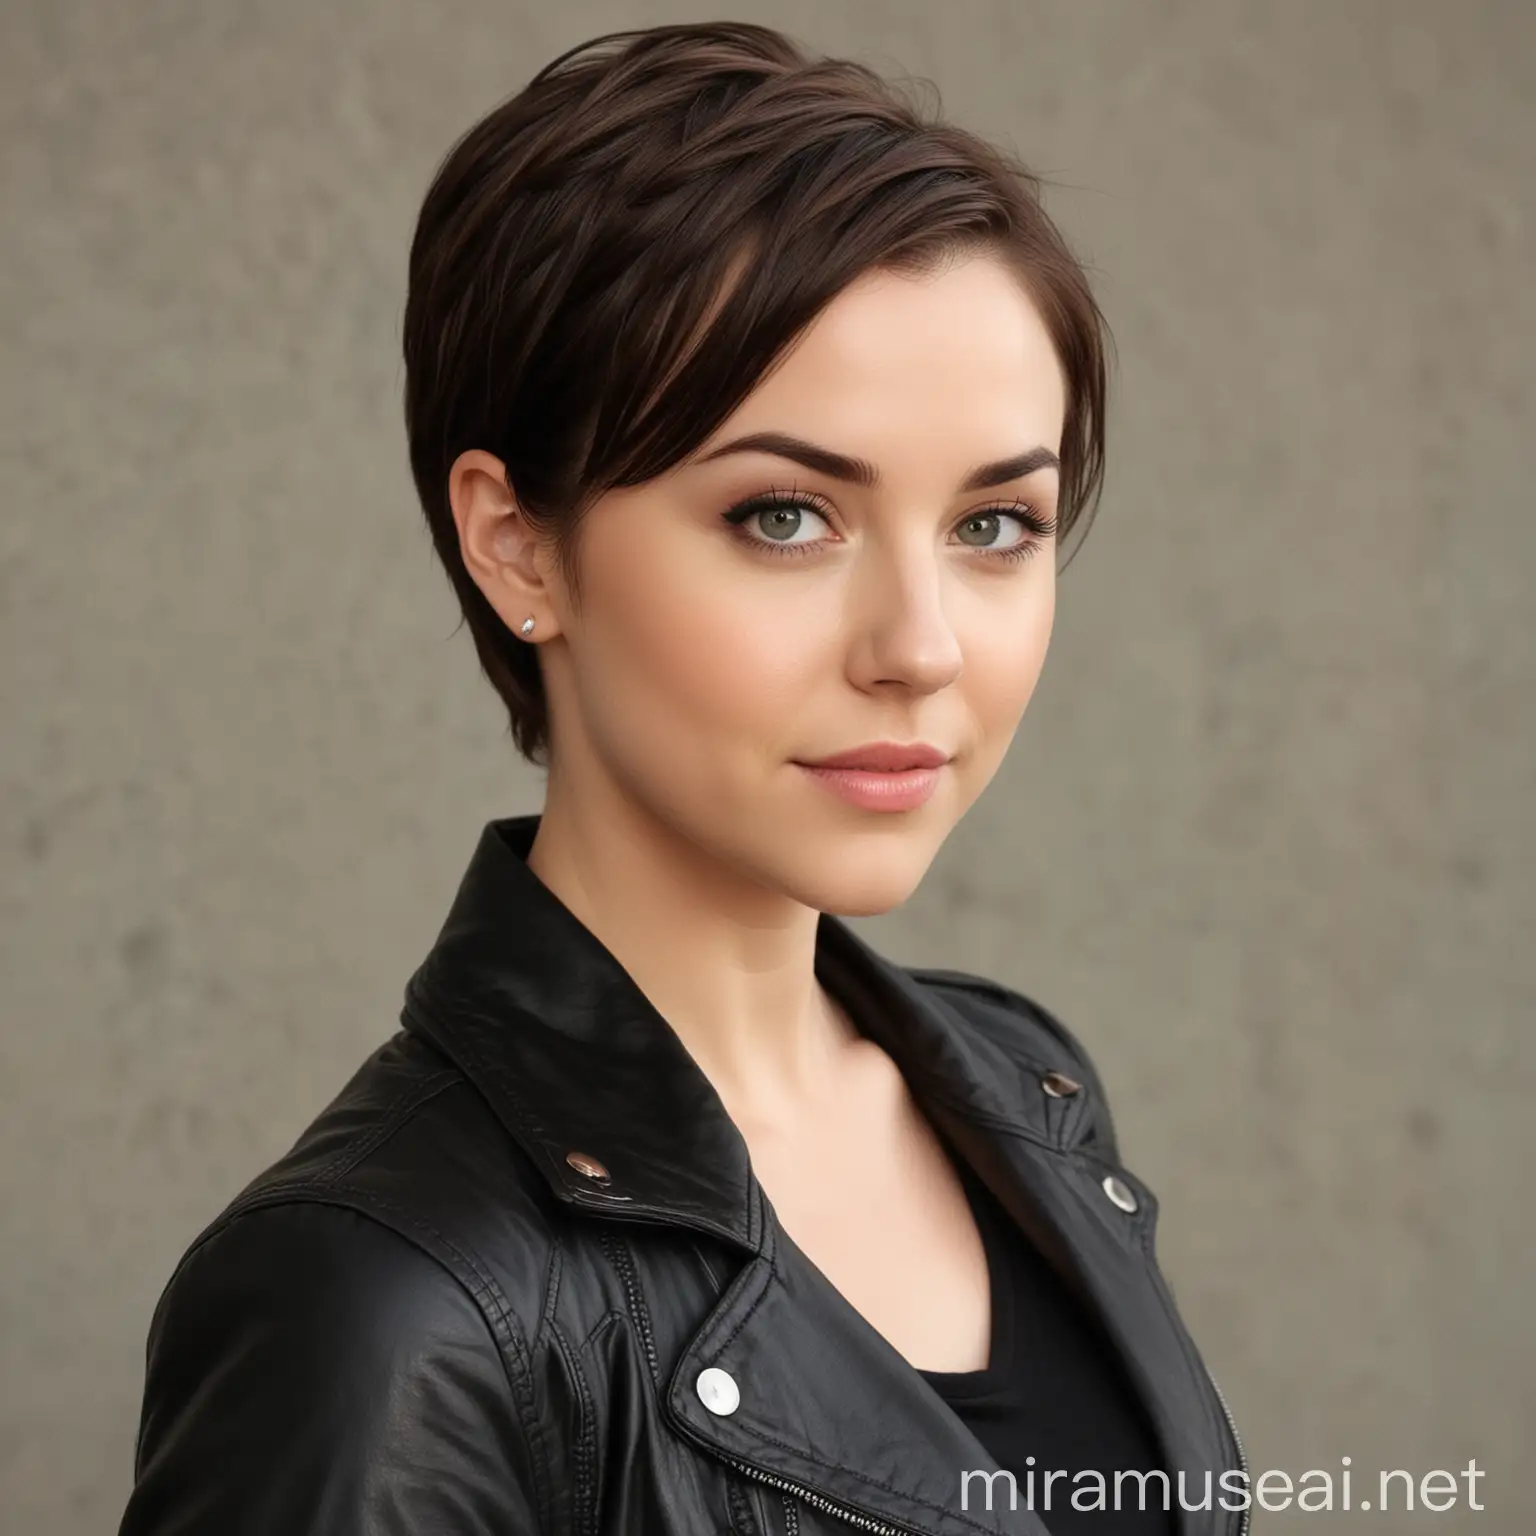 Brittany Curran Sporting Stylish Short Hair and Black Jacket